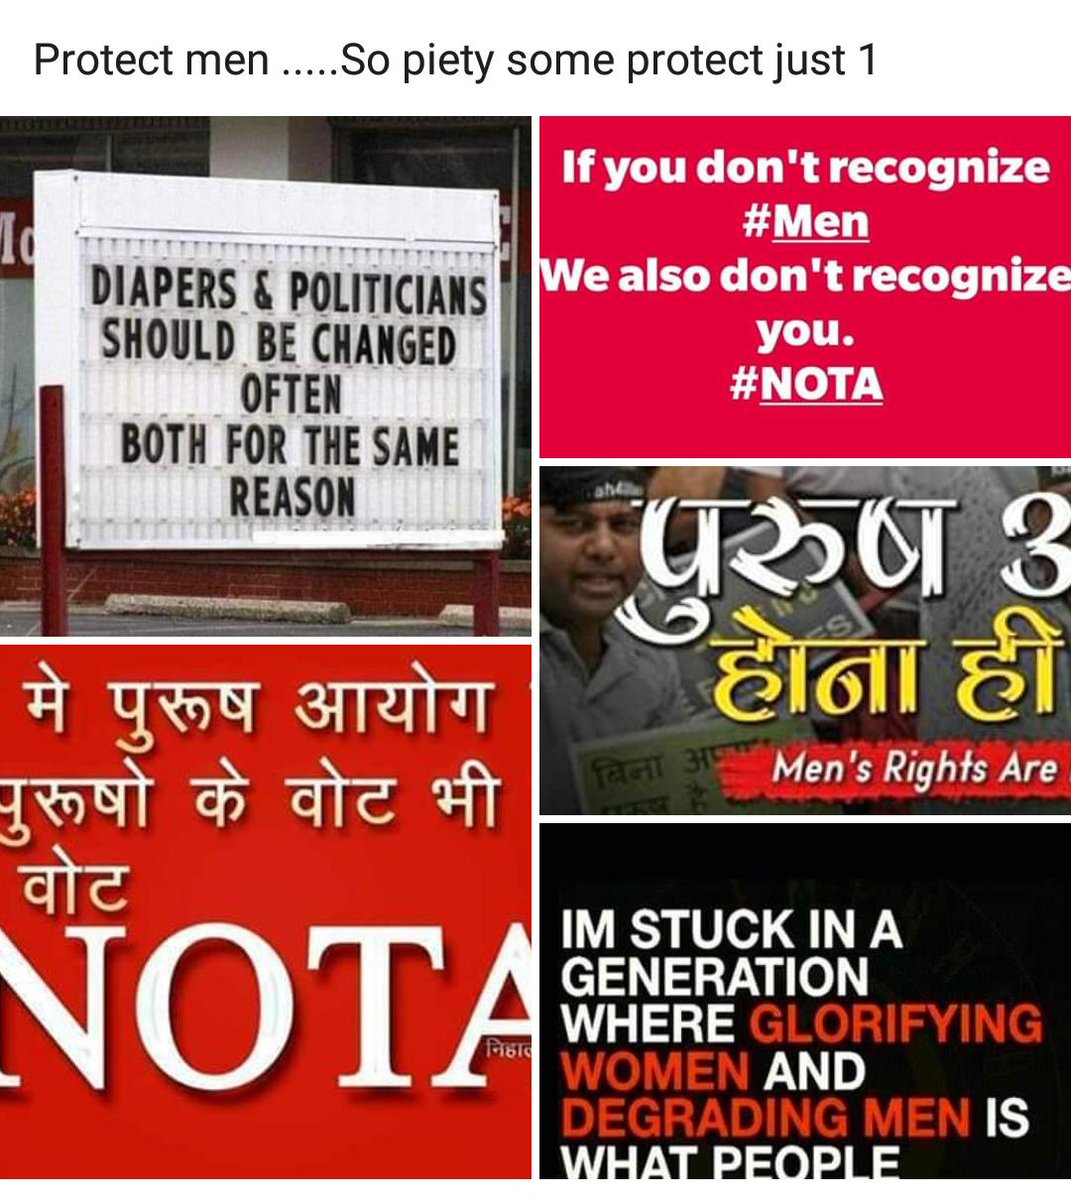 #NOTA is growing in every election because 
#NOTA4MensRights is the only choice when Govt. Doesn't recognize #MensRights & doesn't form #MensCommission @PMOIndia @HMOIndia @BJP4India @Anshulvermamp @harinarayanBJP @TOIIndiaNews @mid_day @sifngp @sifgujarat @sifchandigarh @dna